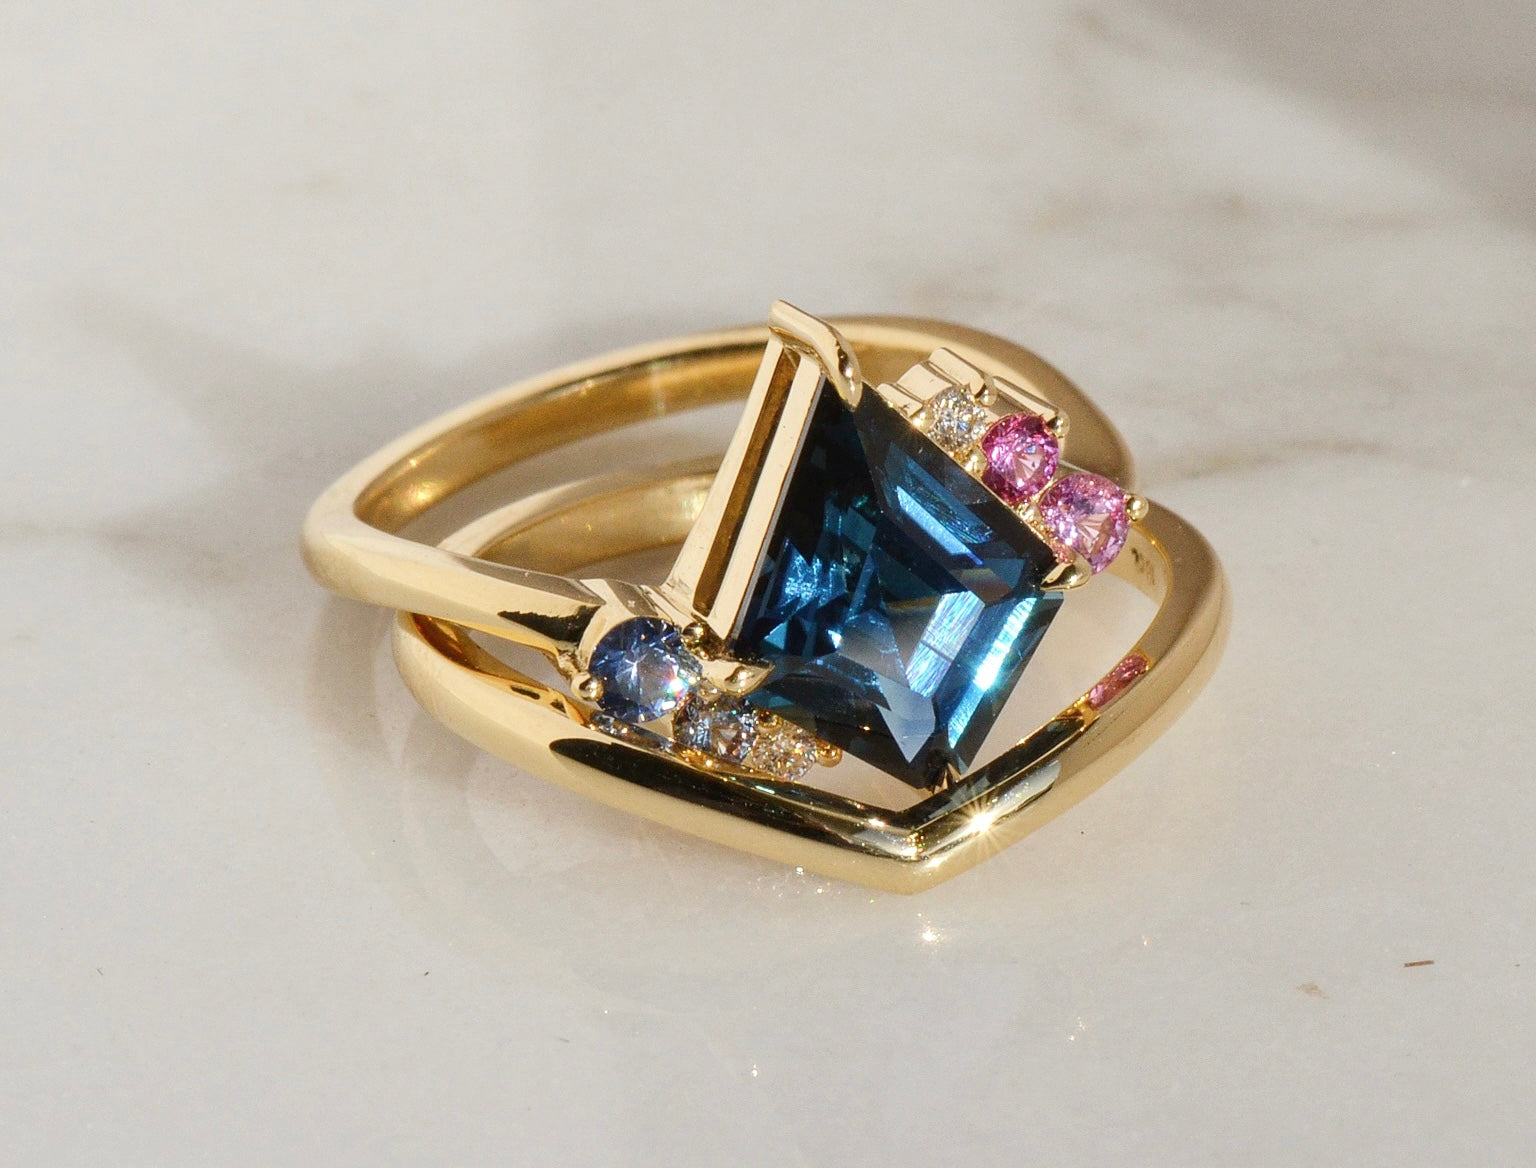 Sapphire engagement ring and gold wedding band designed by Layla Kaisi Collection